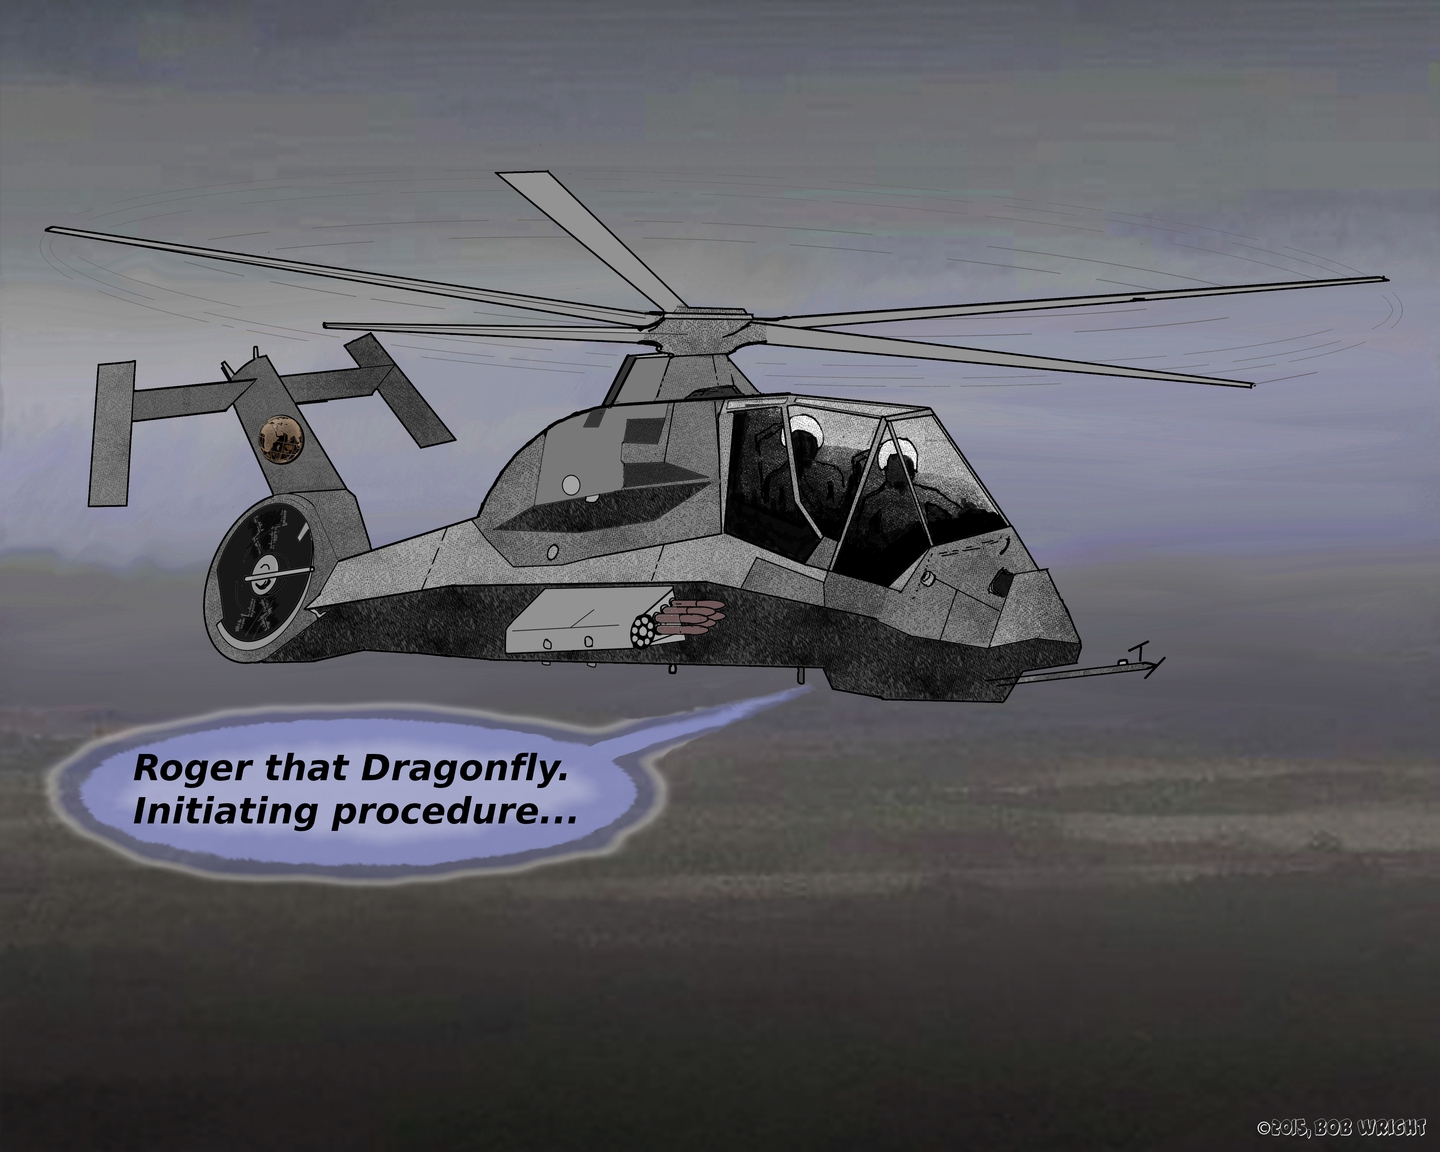 Hornet with radio text reply, "Roger that Dragonfly. Initiating procedure..."